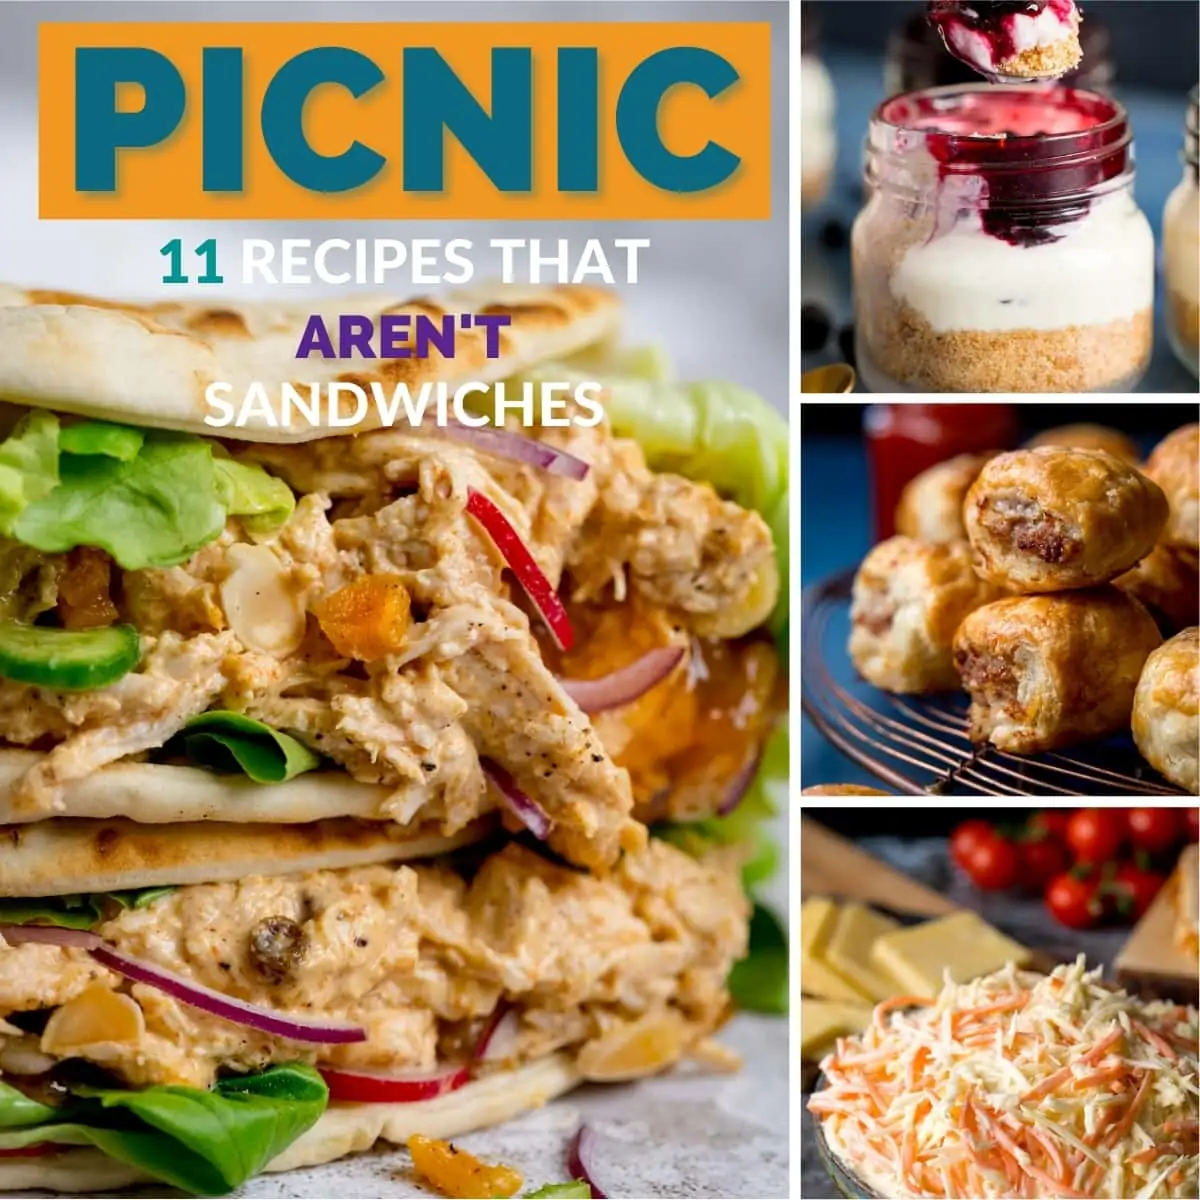 Collage of 4 pictures showing some picnic recipes.